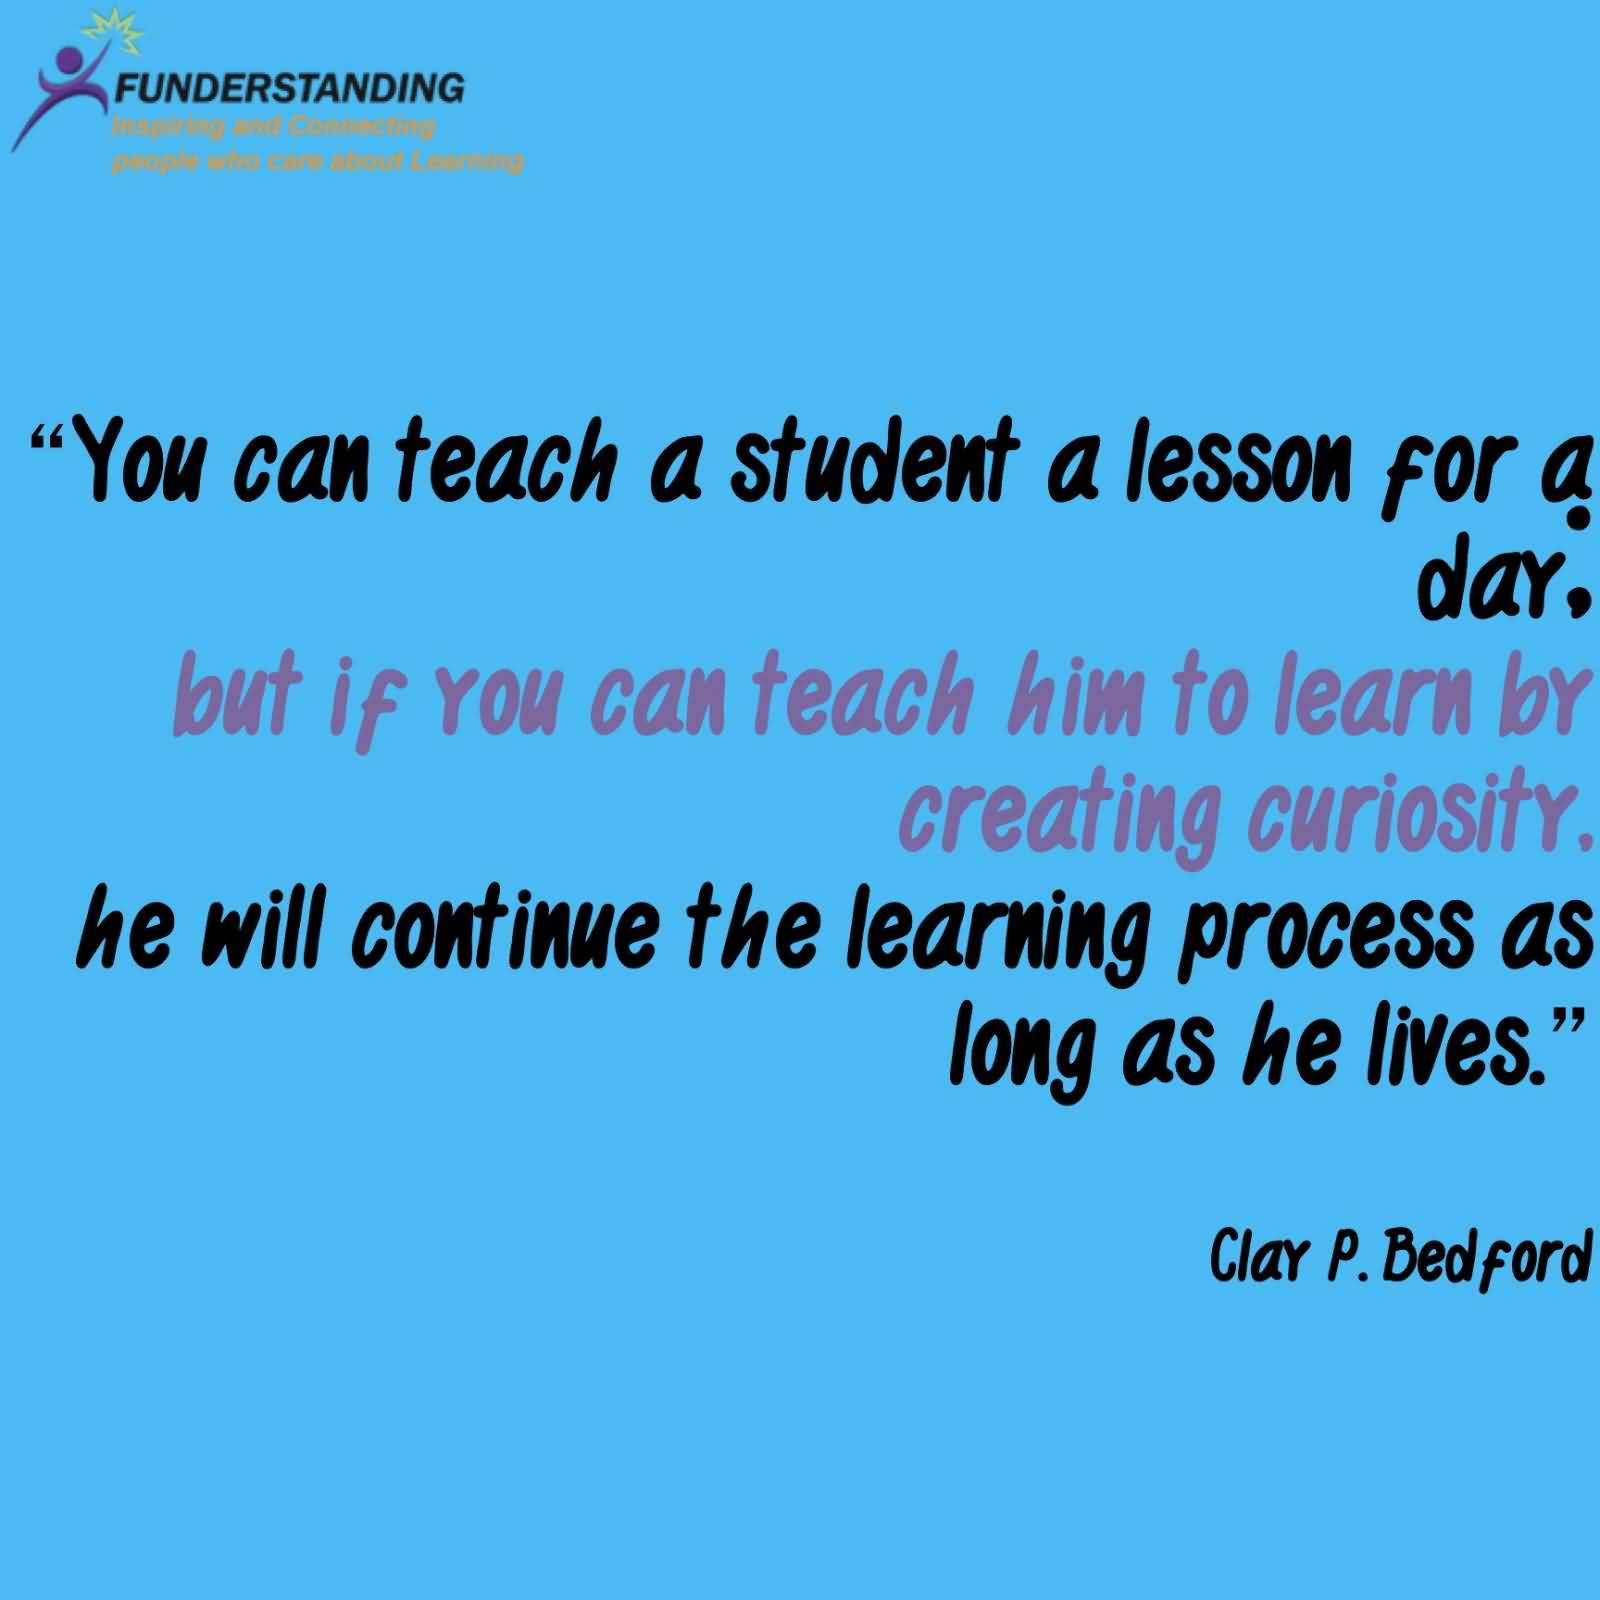 You can teach a student a lesson for a day; but if you can teach him to learn by creating curiosity, he will continue the learning process as long as he lives.